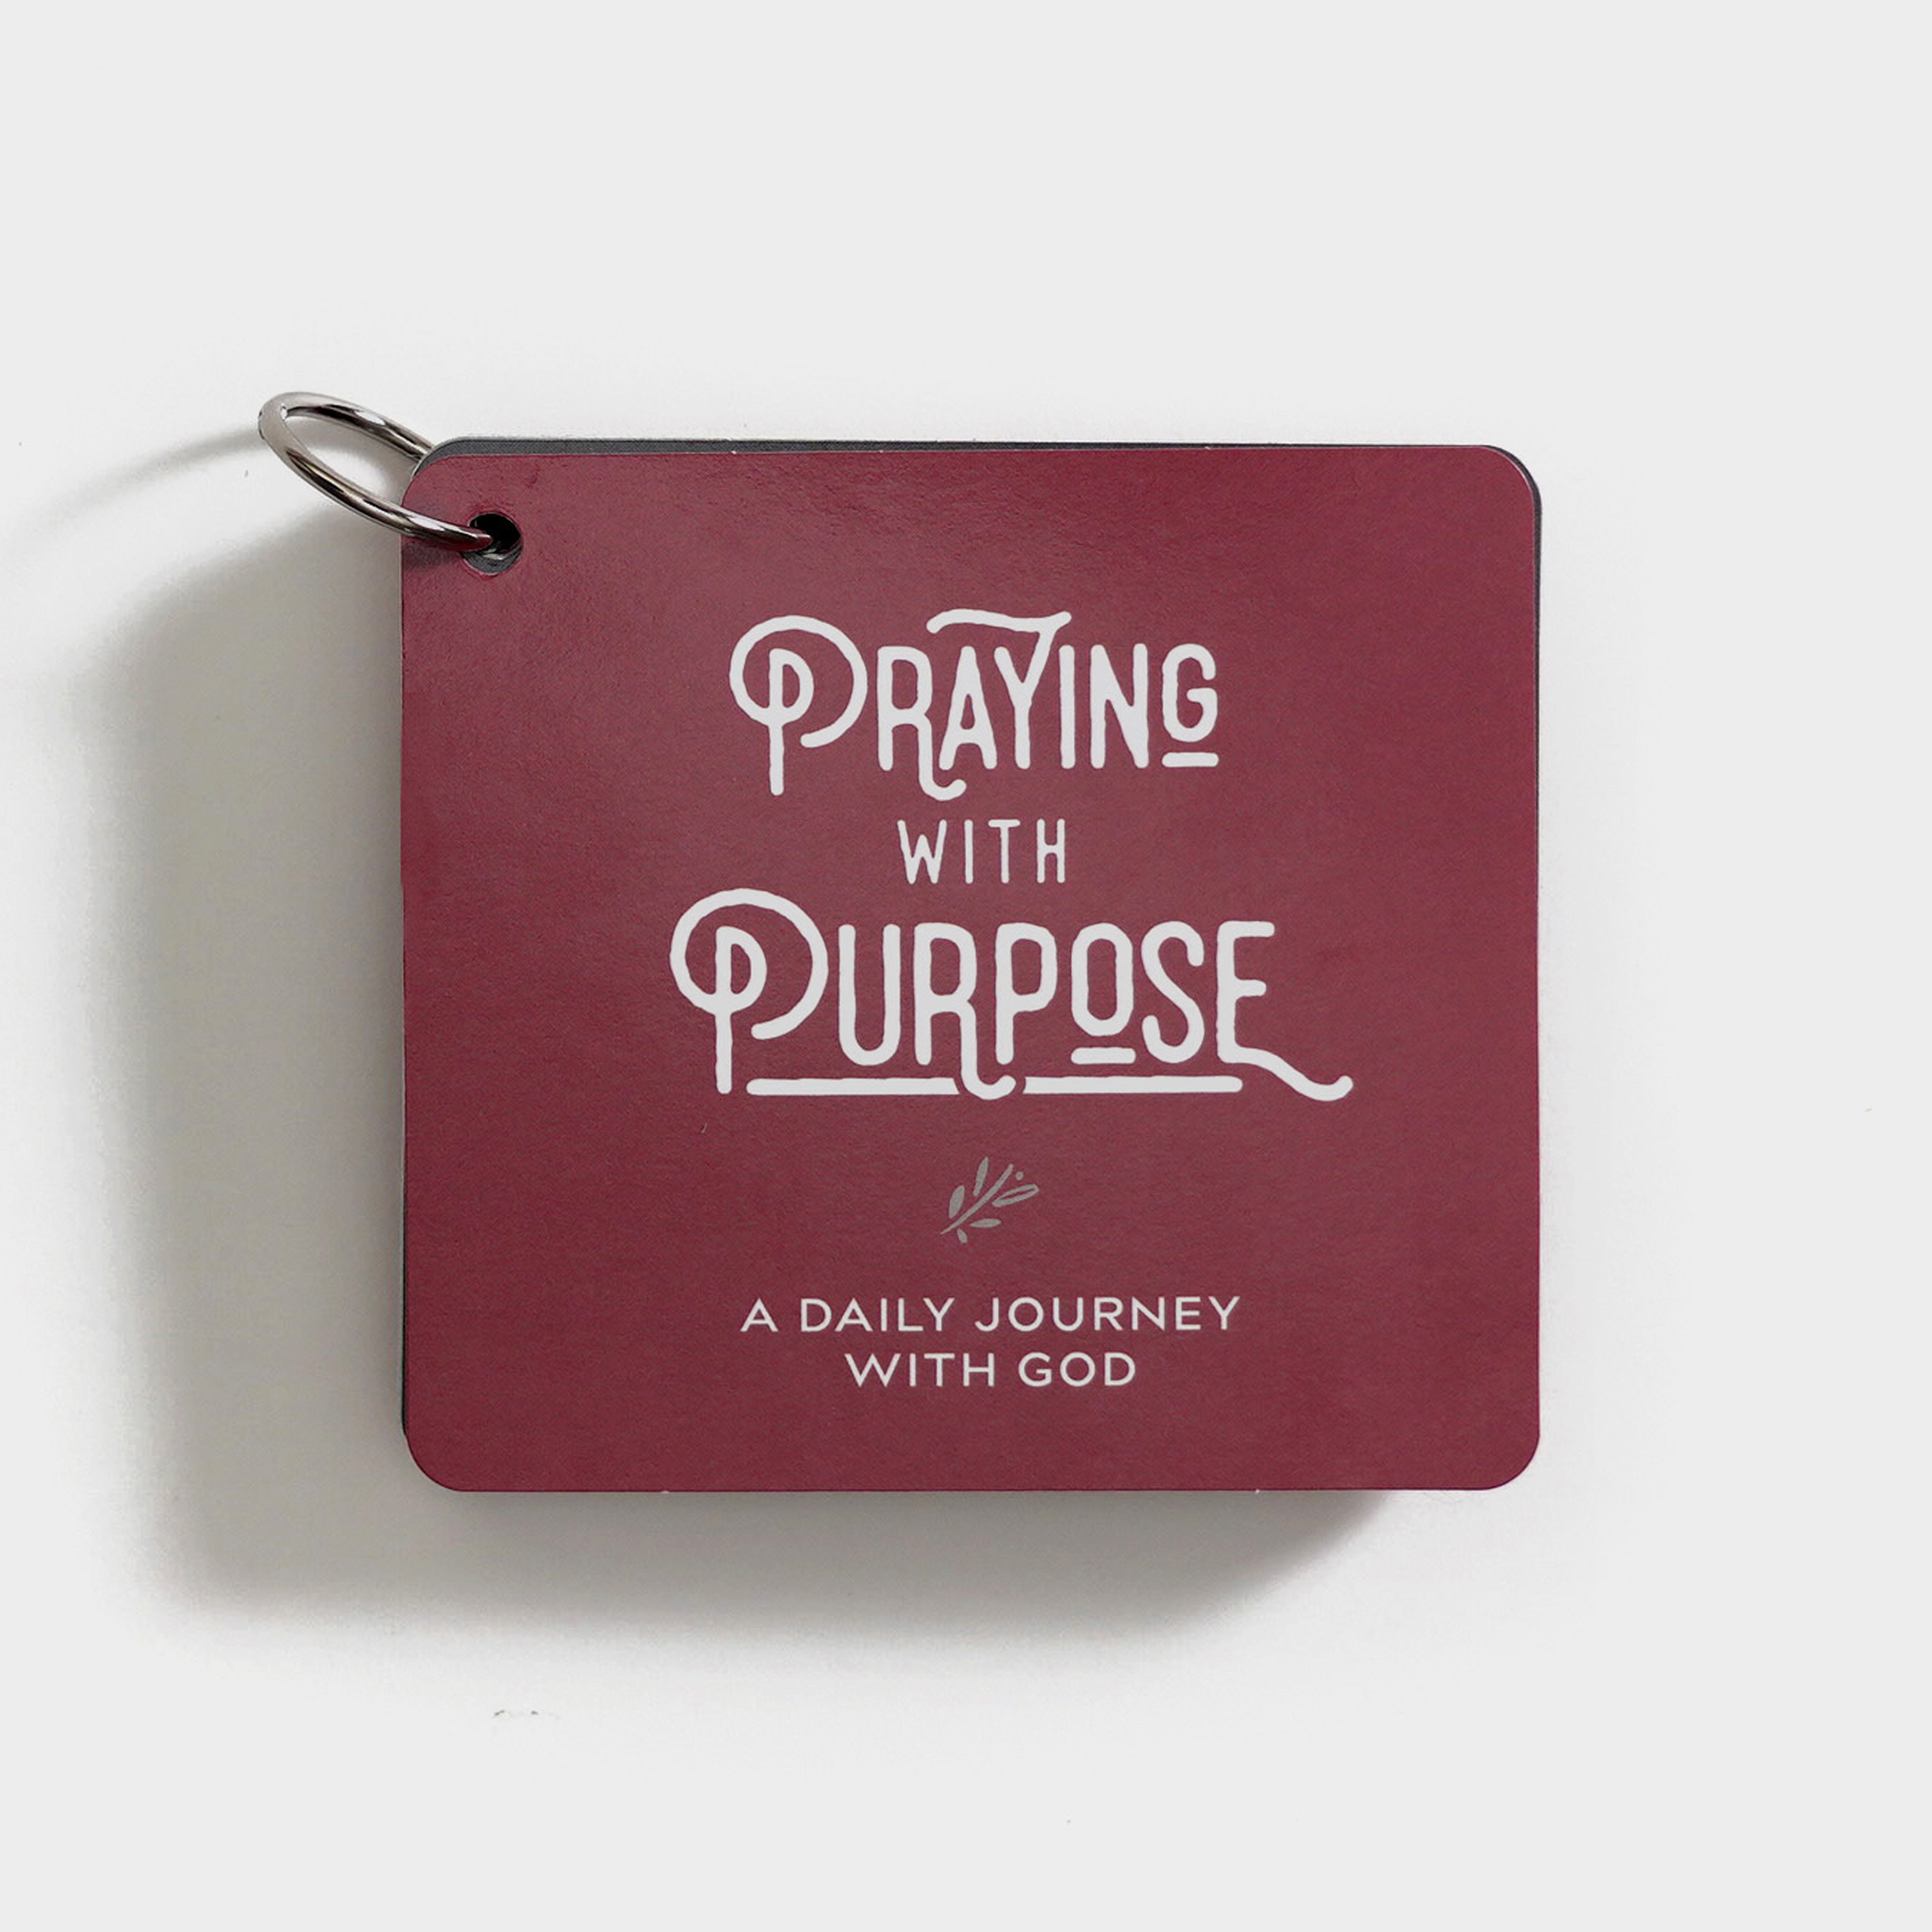 Praying With Purpose: A Daily Journey With God